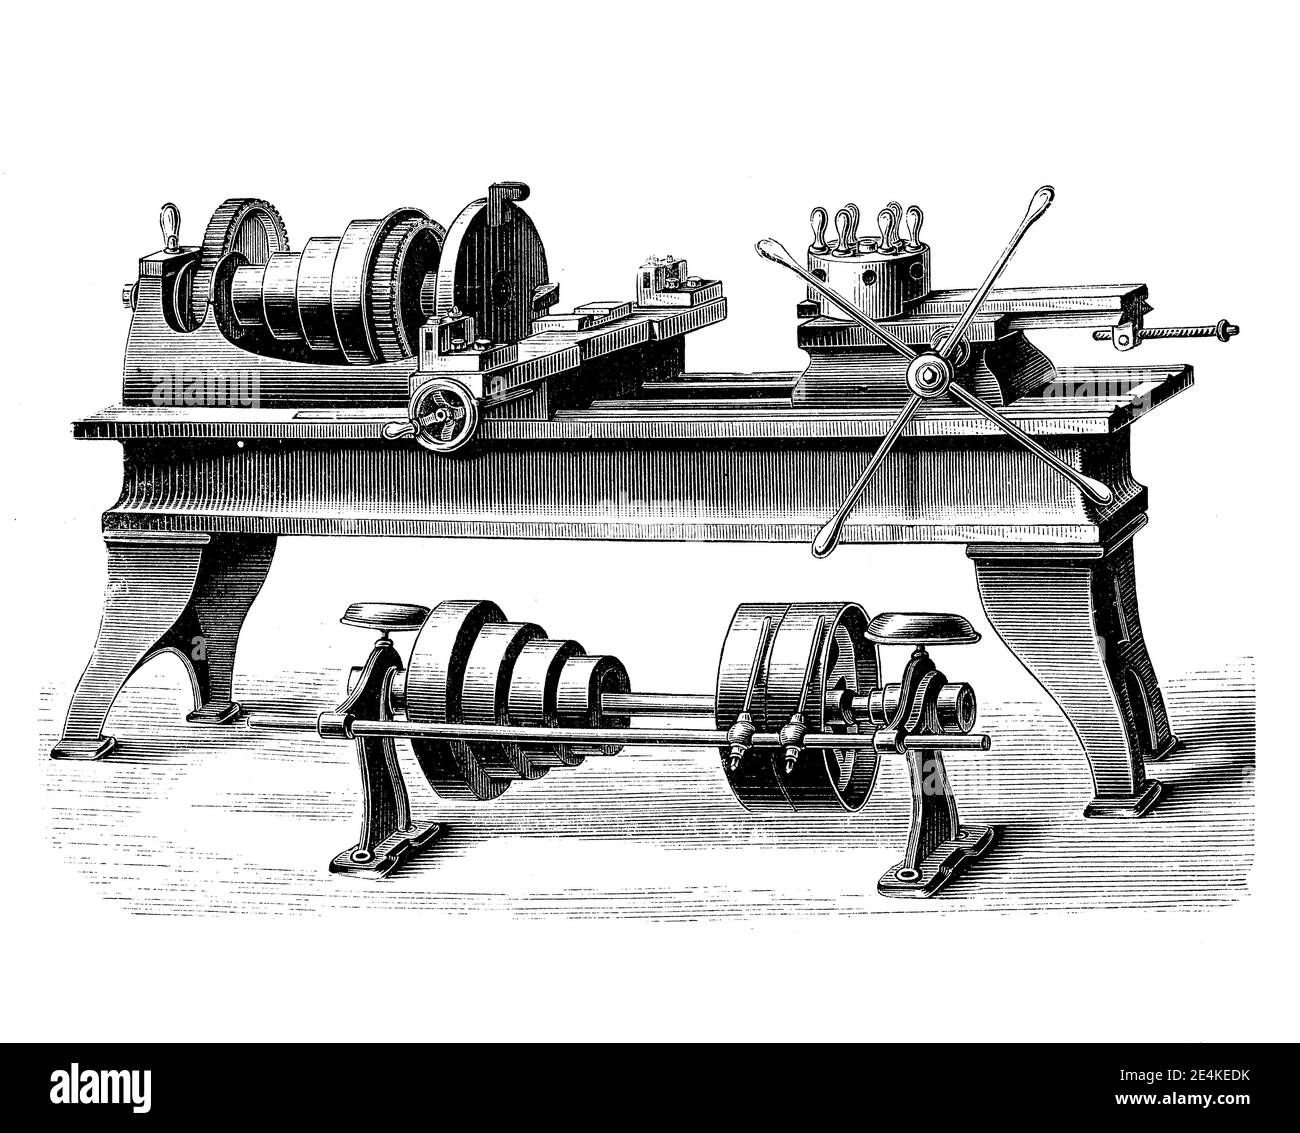 metalworking lathe with revolver head, toolholder that allows multiple cutting operations to be performed, each with a different cutting tool in rapid succession, 19th century engraving Stock Photo